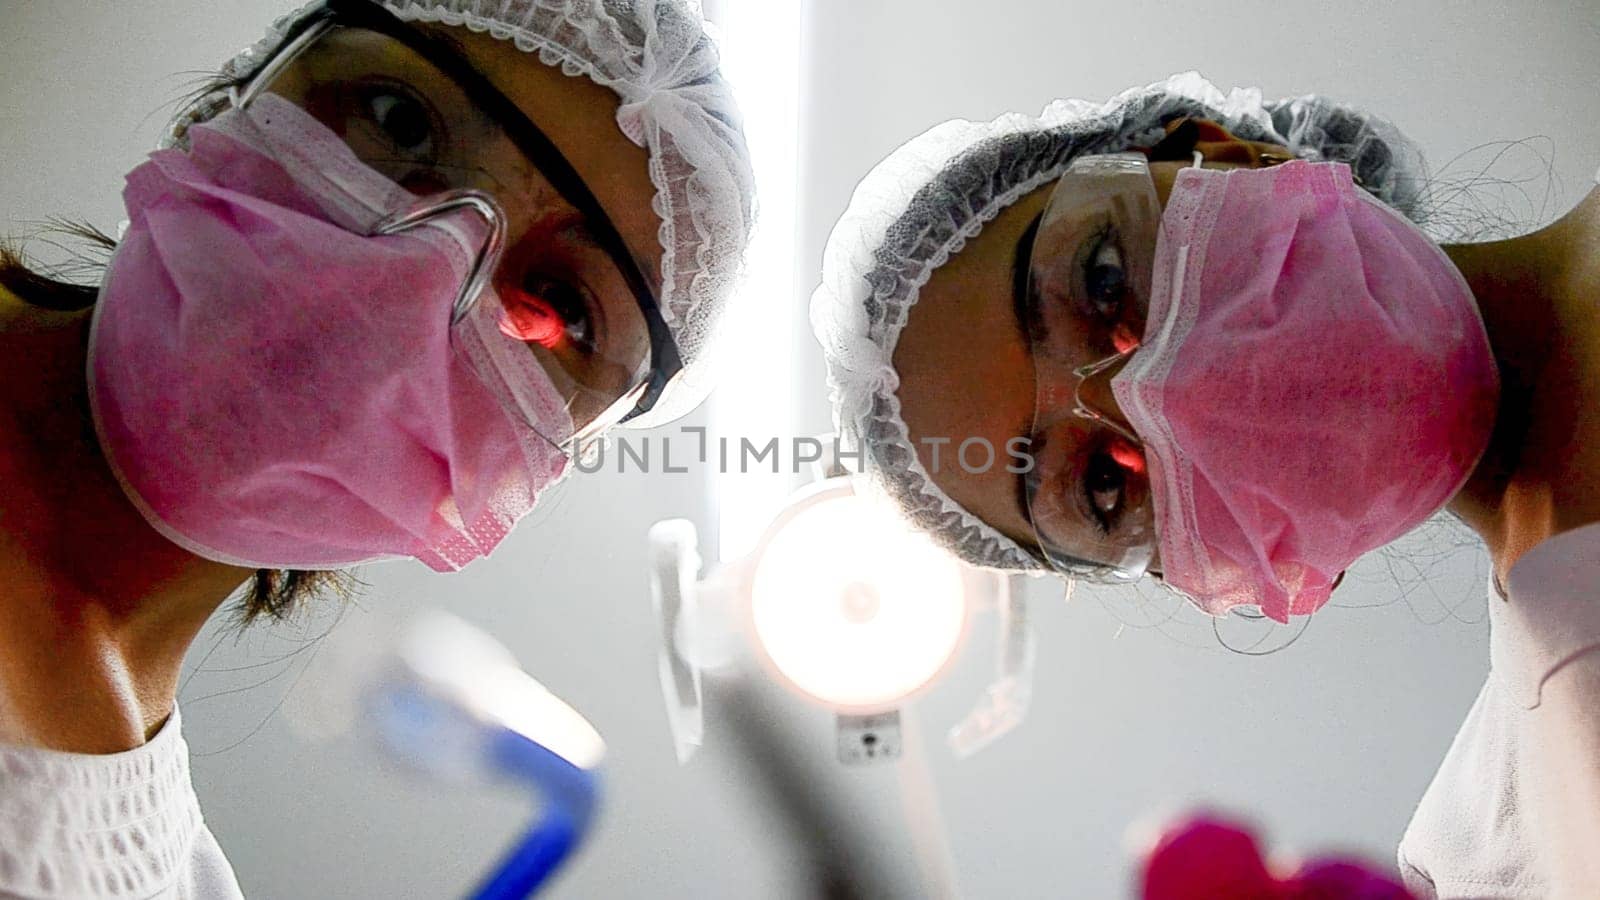 Medical team perspective from patient's viewpoint by Peruphotoart